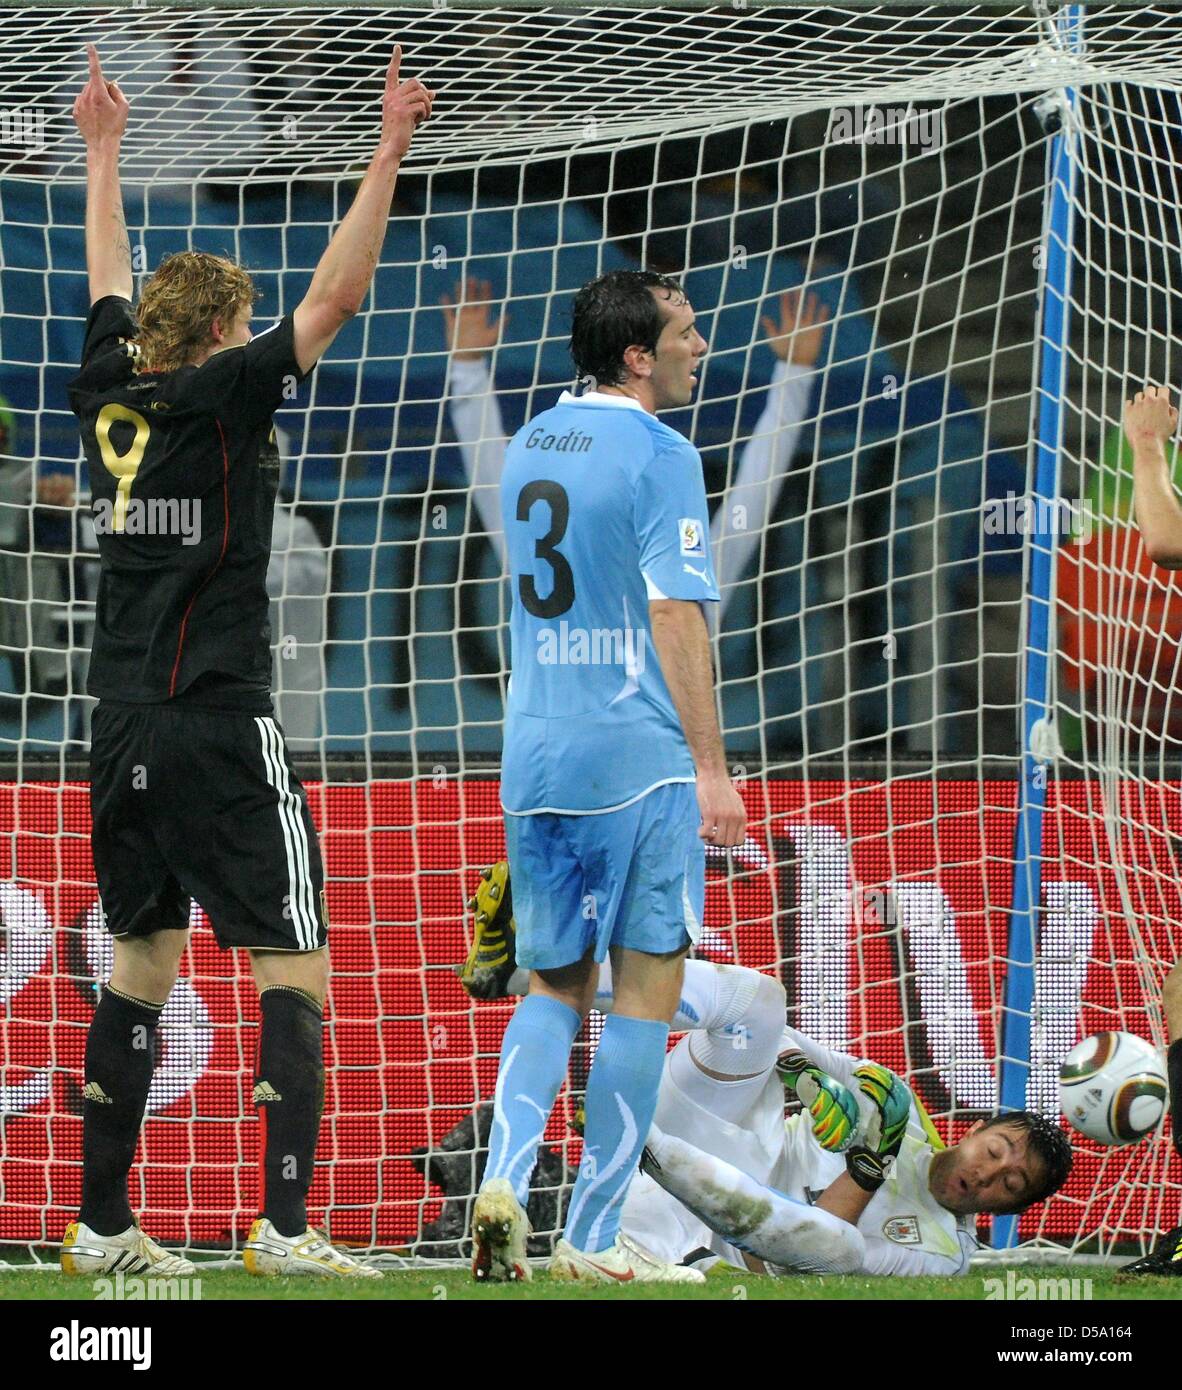 Germany's Stefan Kiessling (L) celebrates after his team mate Sami Khedira (out of picture) scored the 3-2 against Uruguay's goalkeeper Fernando Muslera during the 2010 FIFA World Cup third place match between Uruguay and Germany at the Nelson Mandela Bay Stadium in Port Elizabeth, South Africa 10 July 2010. Photo: Marcus Brandt dpa - Please refer to http://dpaq.de/FIFA-WM2010-TC Stock Photo